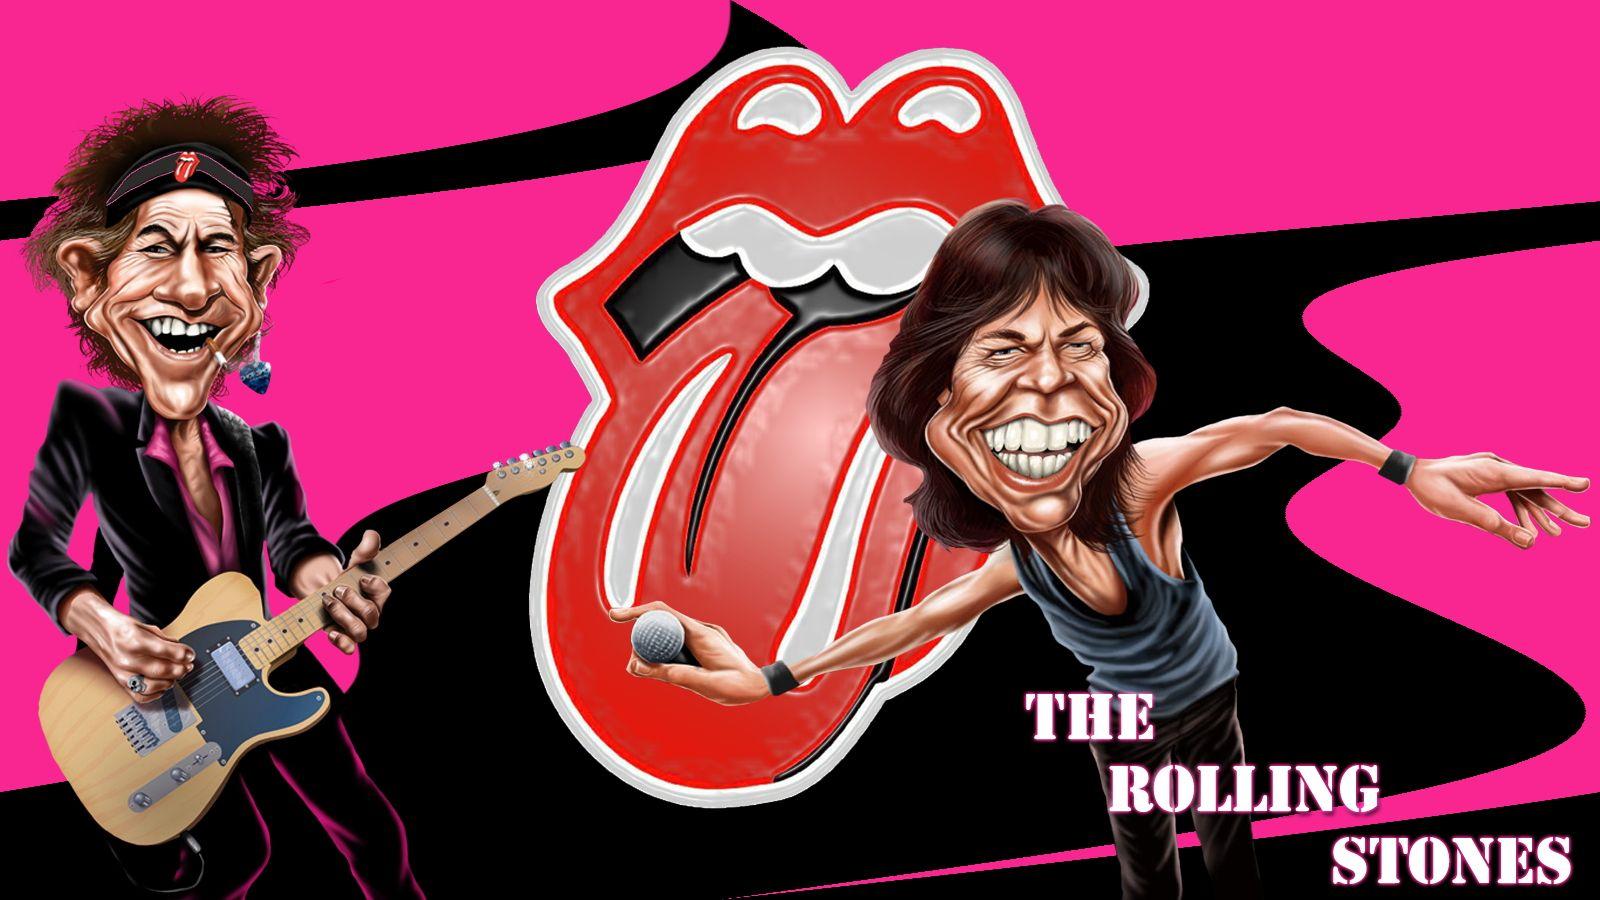 The rolling stones wallpaper Gallery